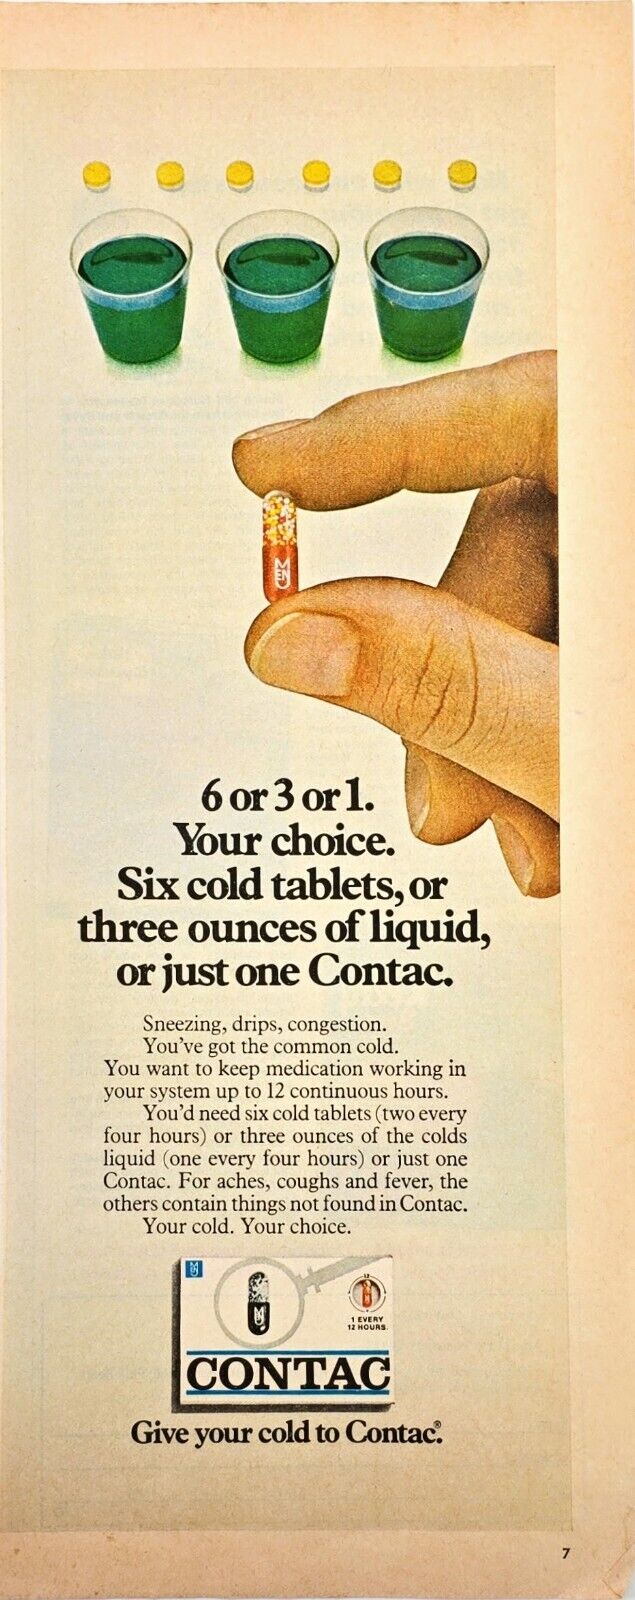 Contac Cold Medicine For The Common Cold 1/3 Page Vintage 1975 Print Ad